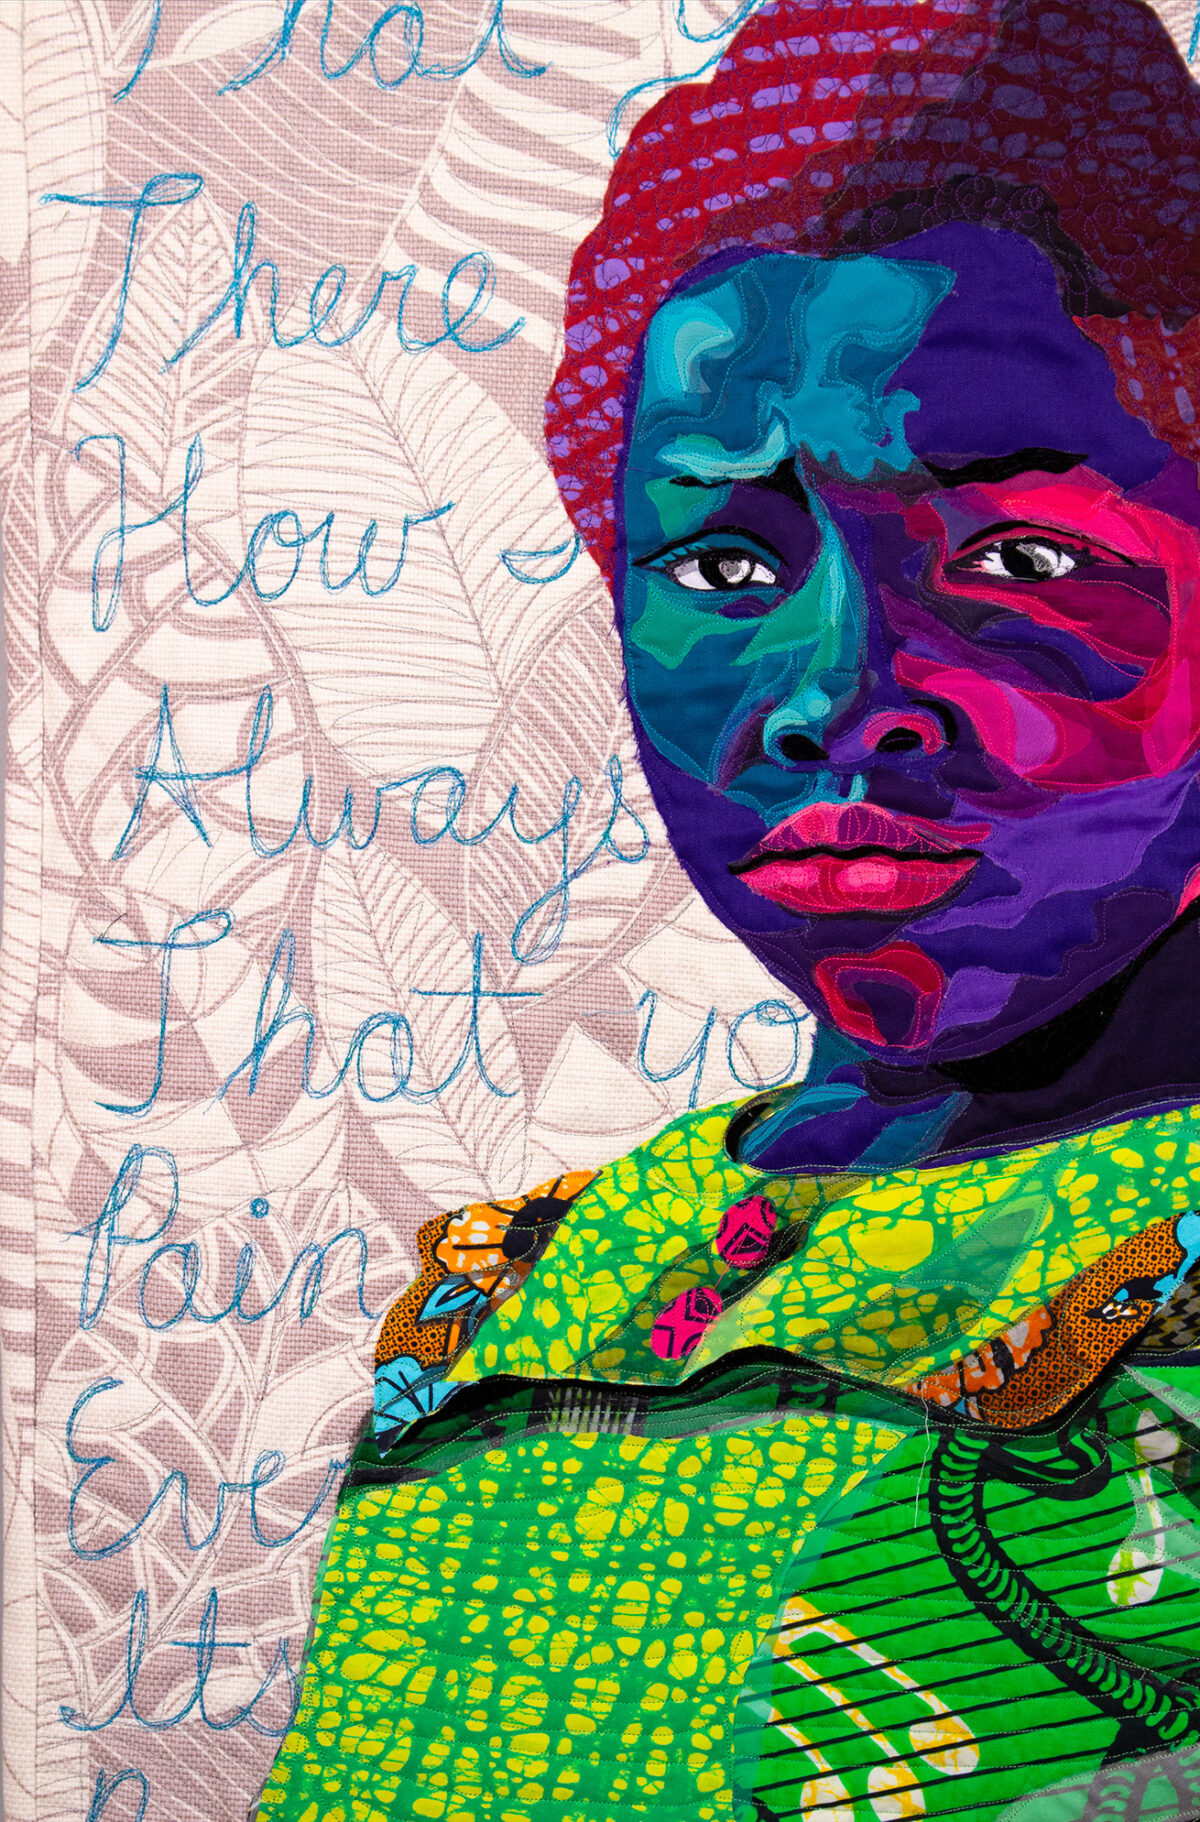 Vibrant Portraits Painted With Patterned Fabrics By Bisa Butler 2